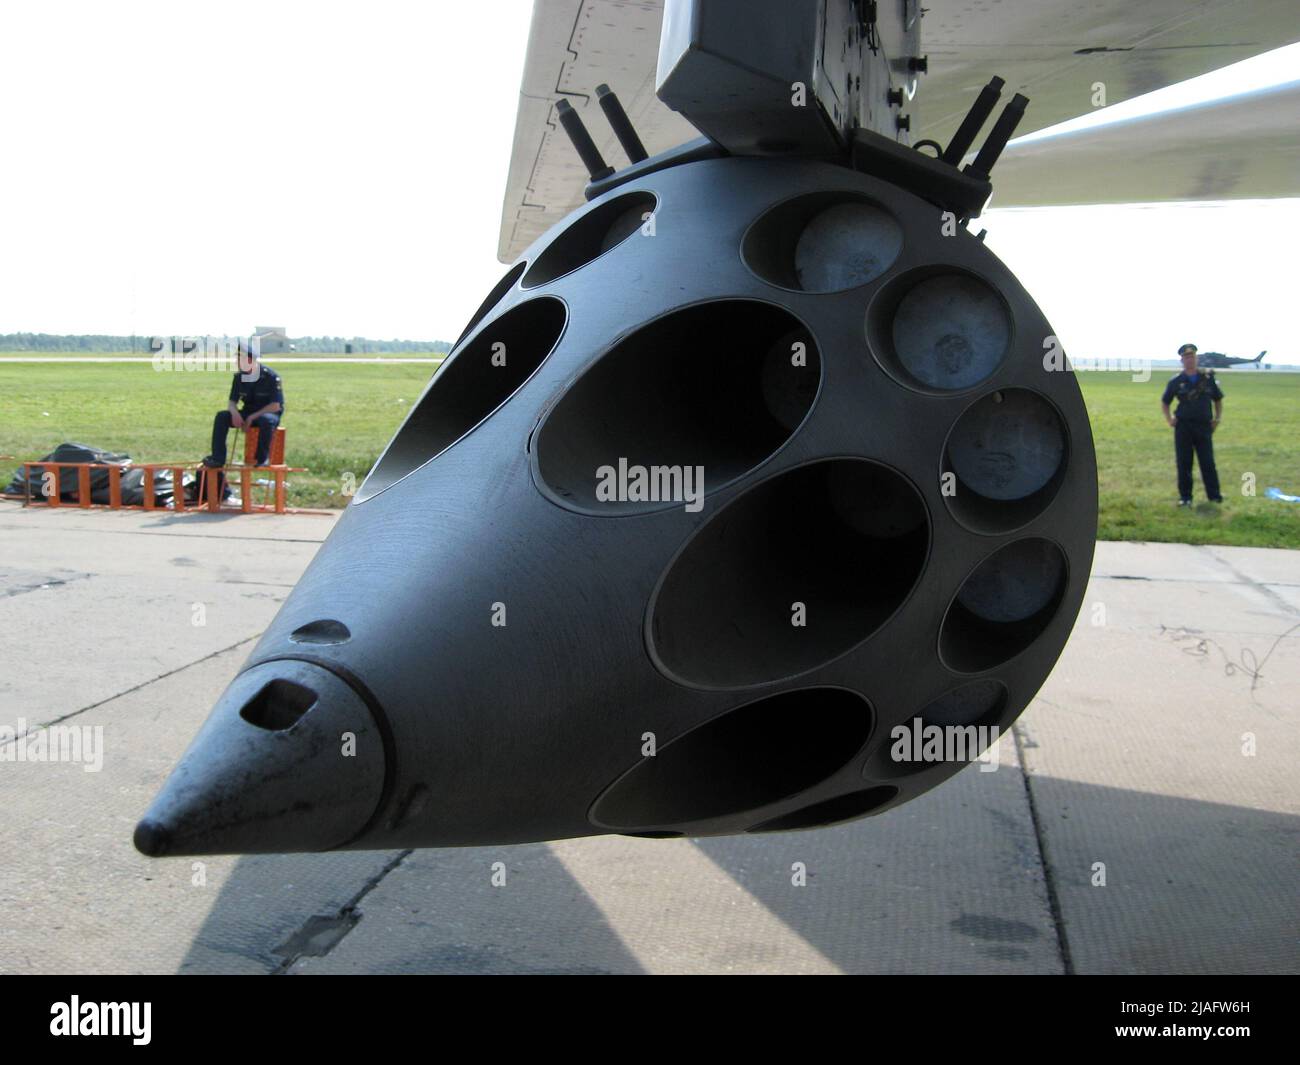 Ryazan, Ryazan Oblast, Russia - 8-08-2015: Cannon on the wing of a military aircraft Stock Photo